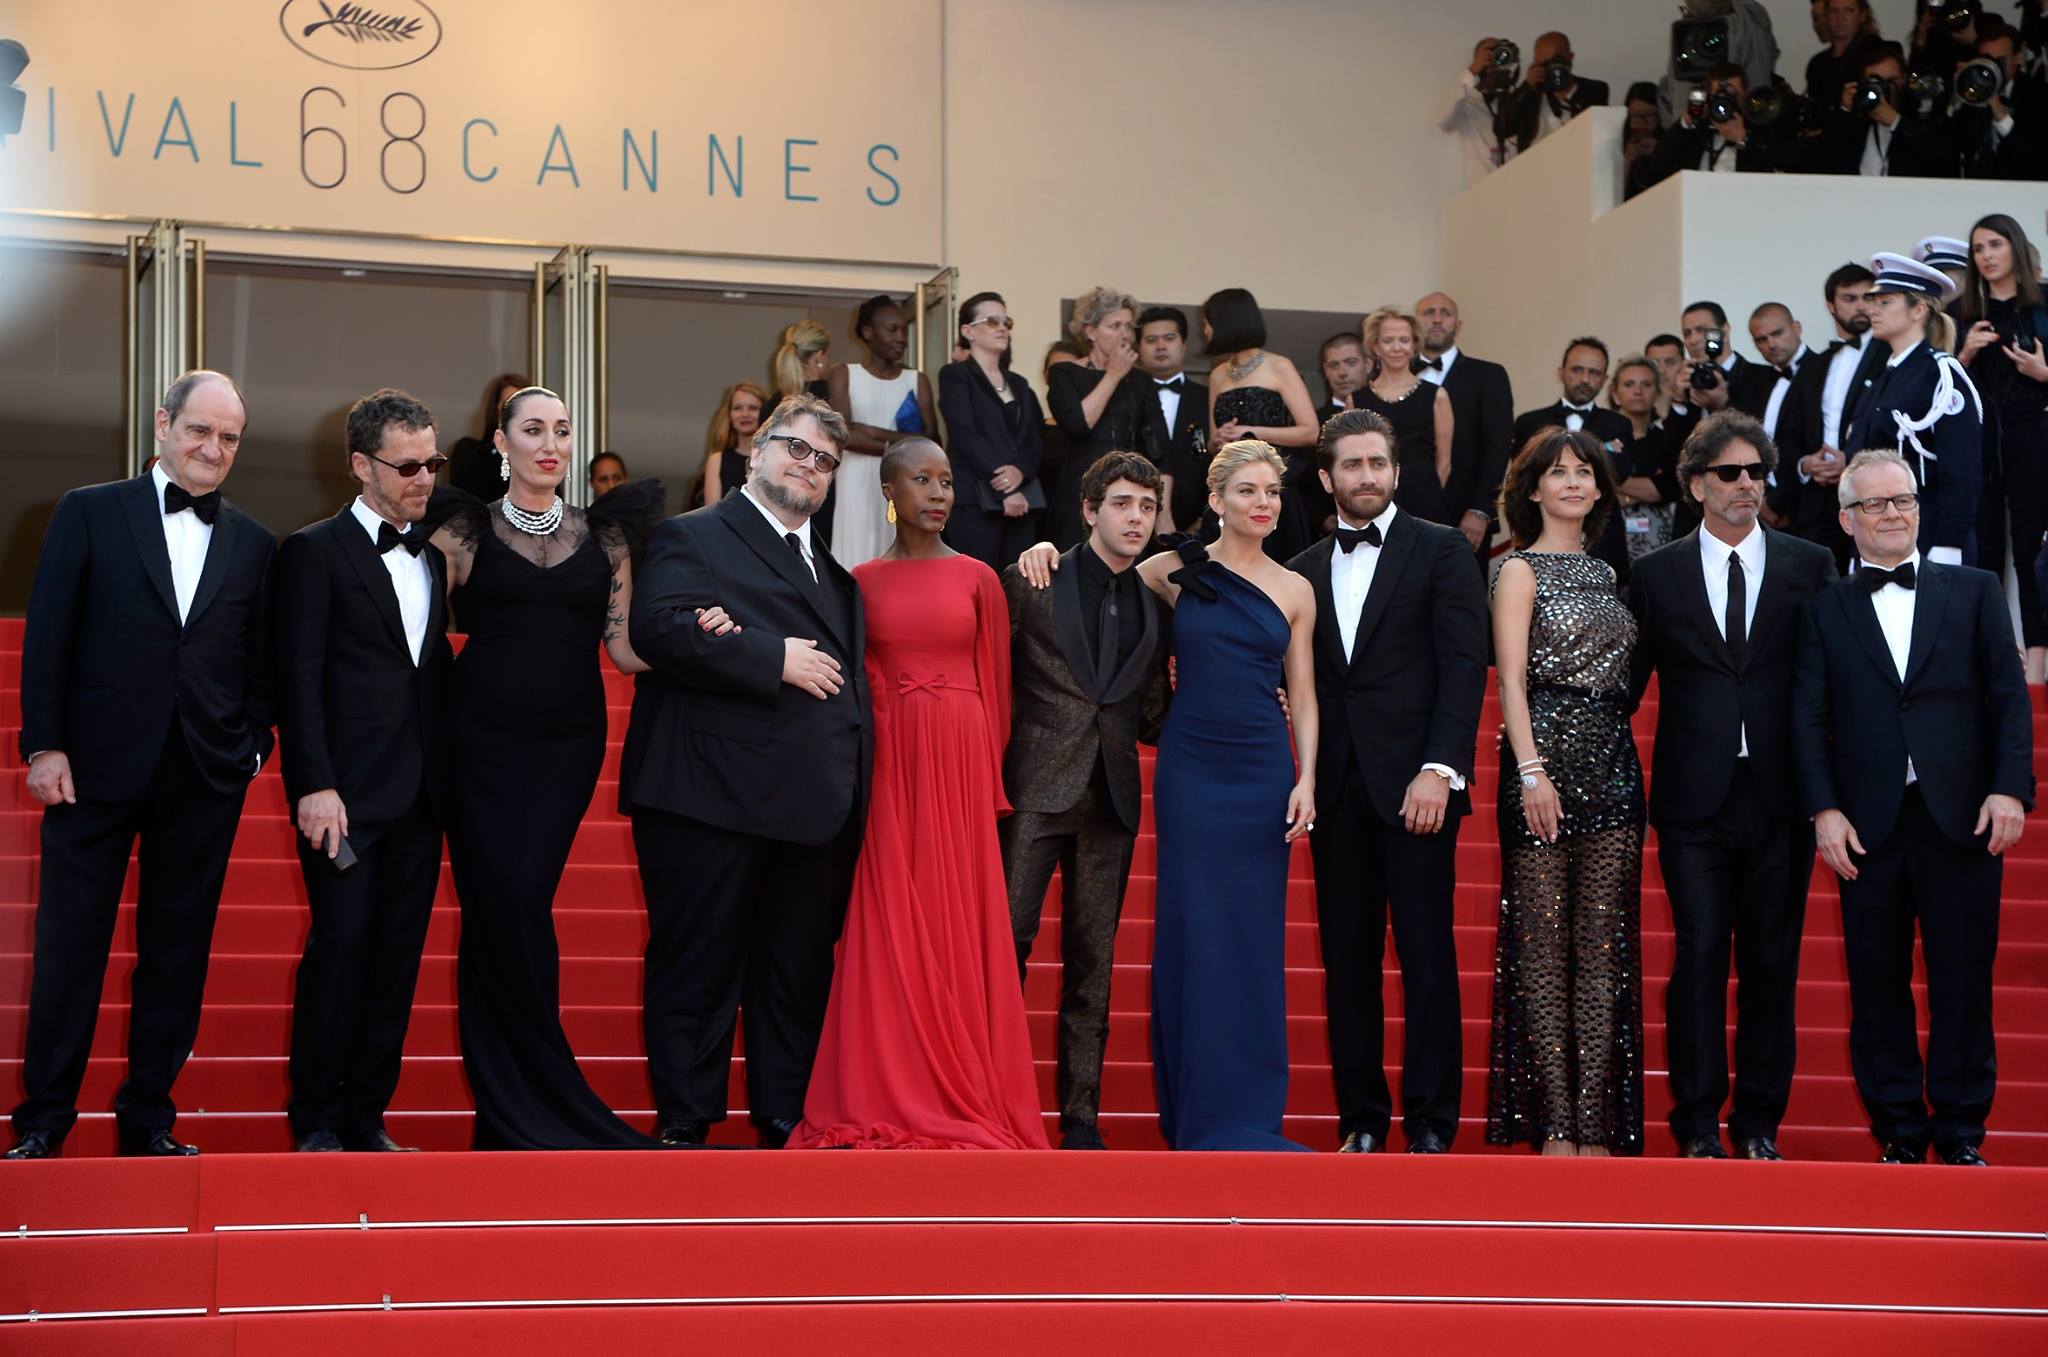 The jury for the 68th Cannes Film Festival 2015